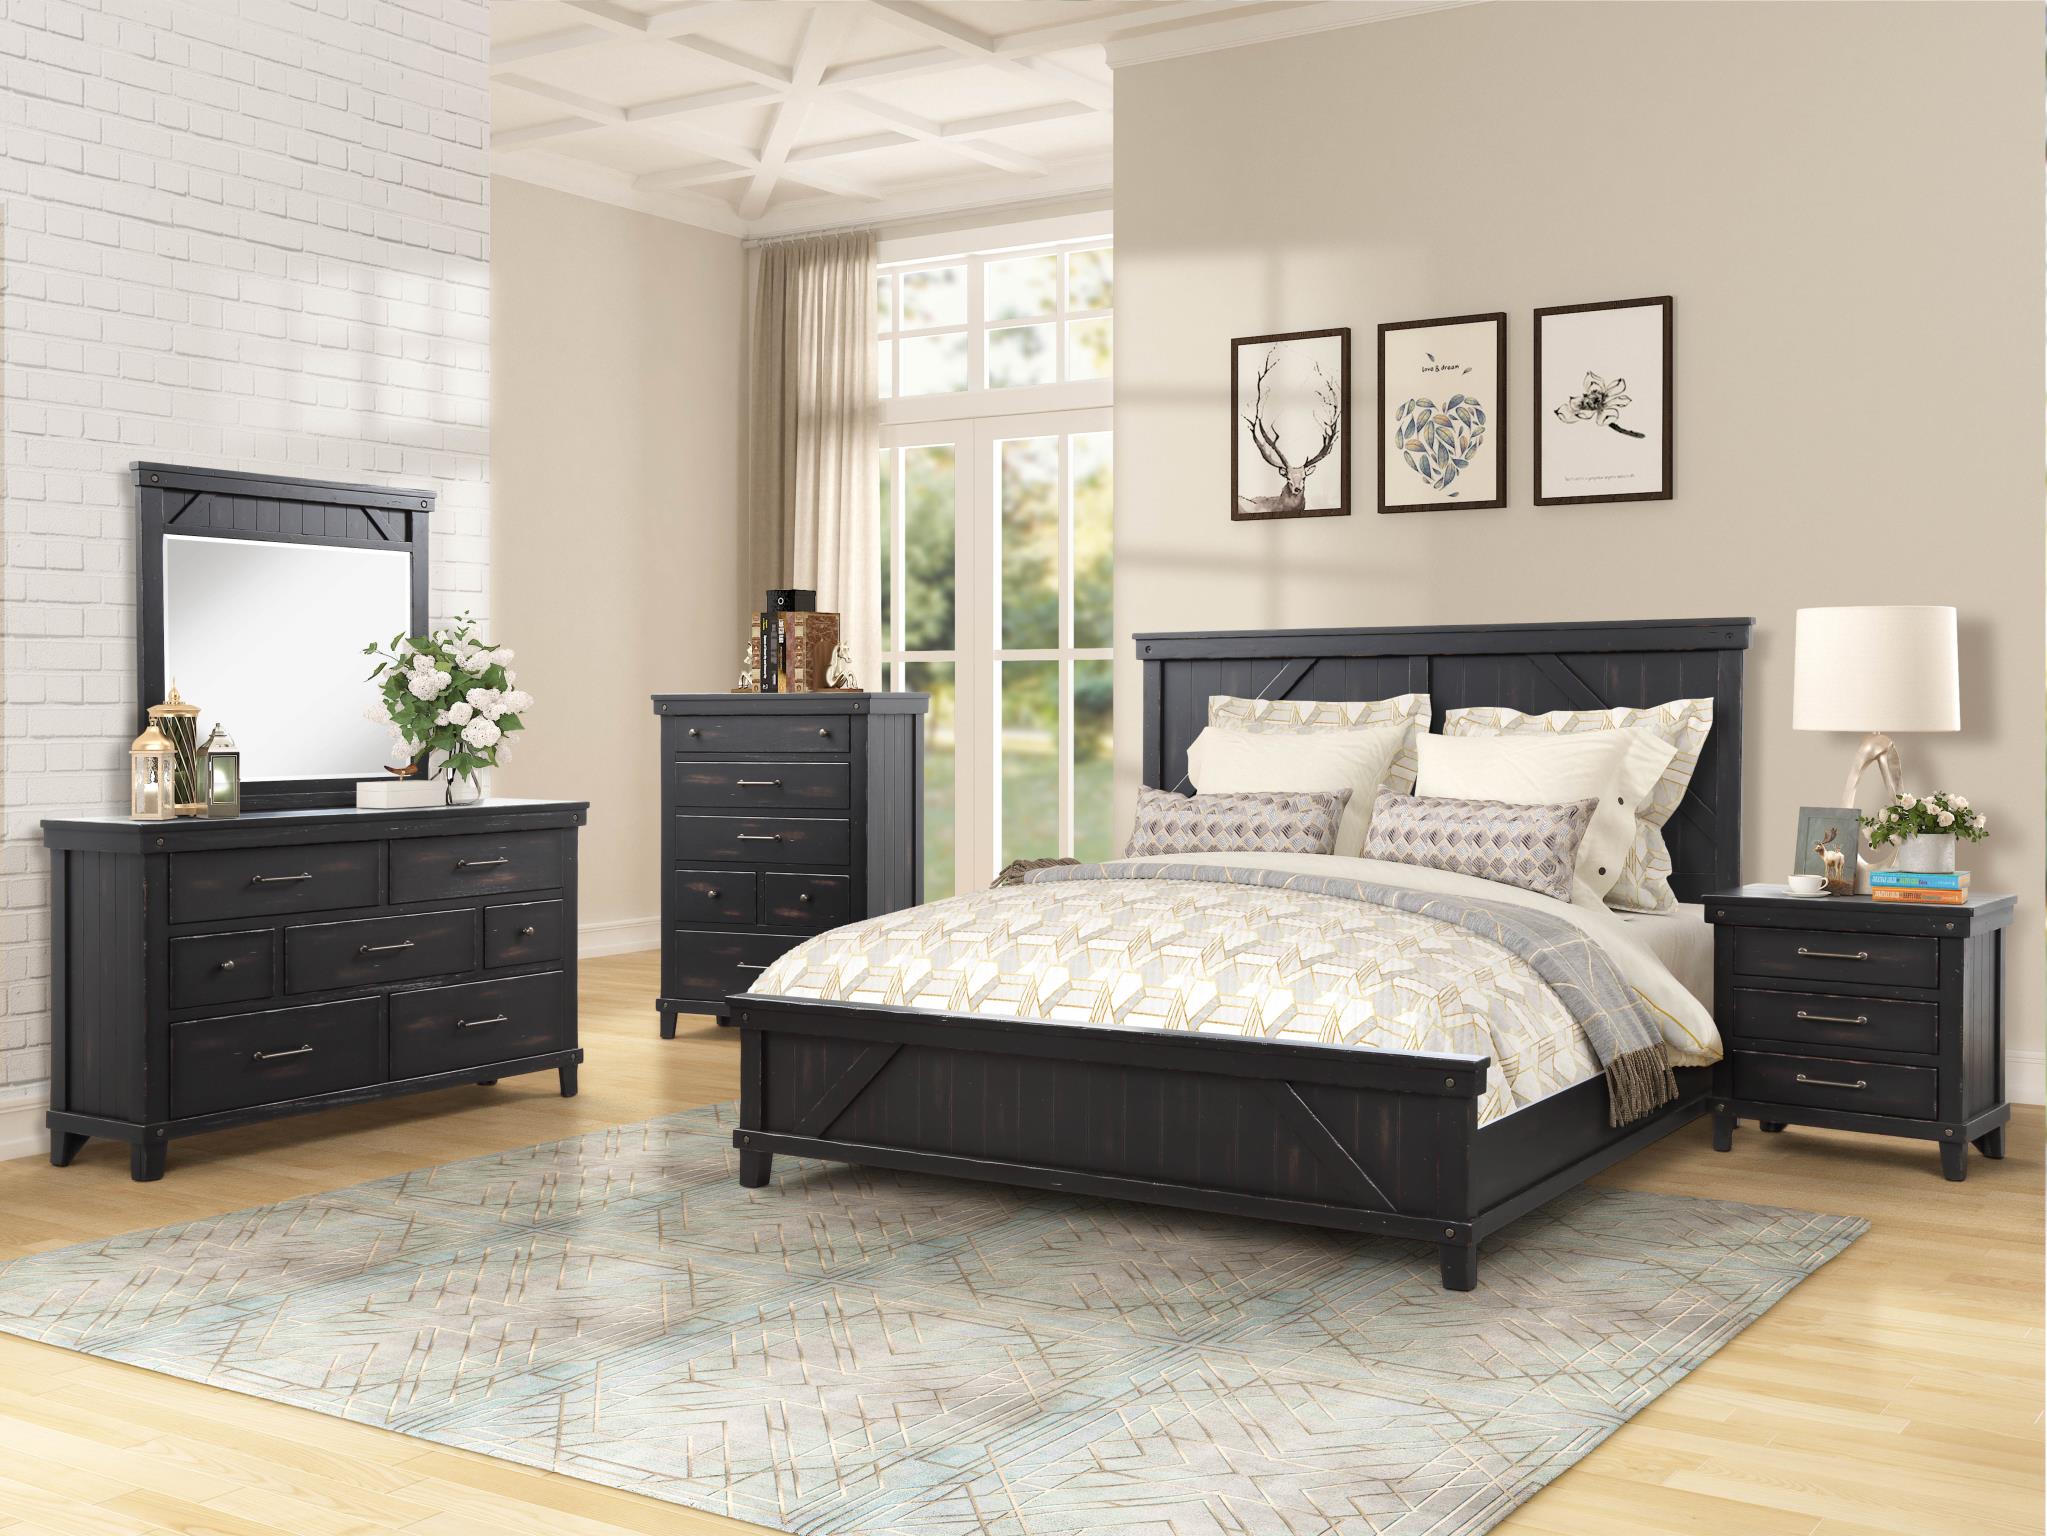 farmhouse bedroom with black furniture